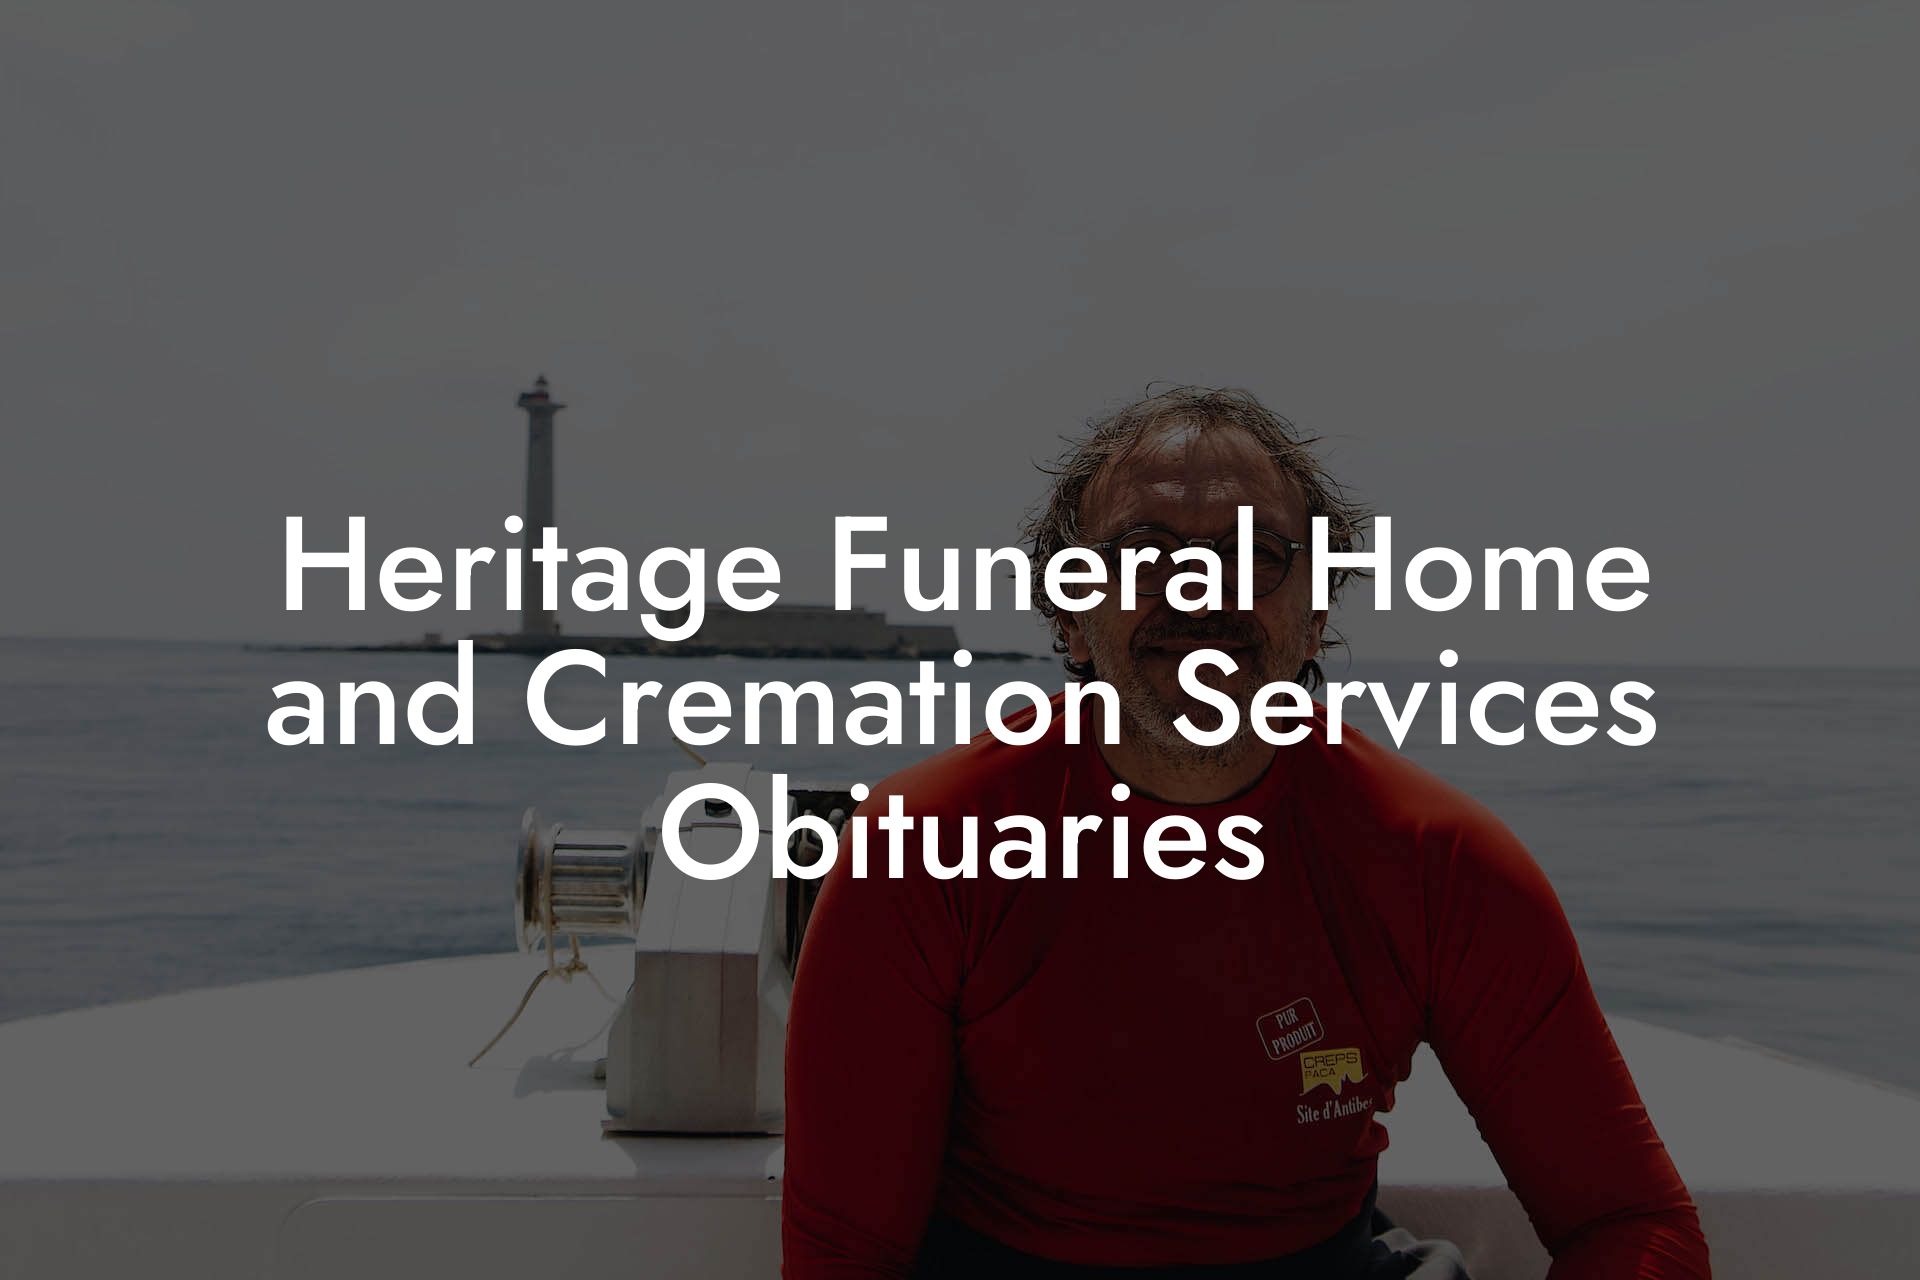 Heritage Funeral Home and Cremation Services Obituaries